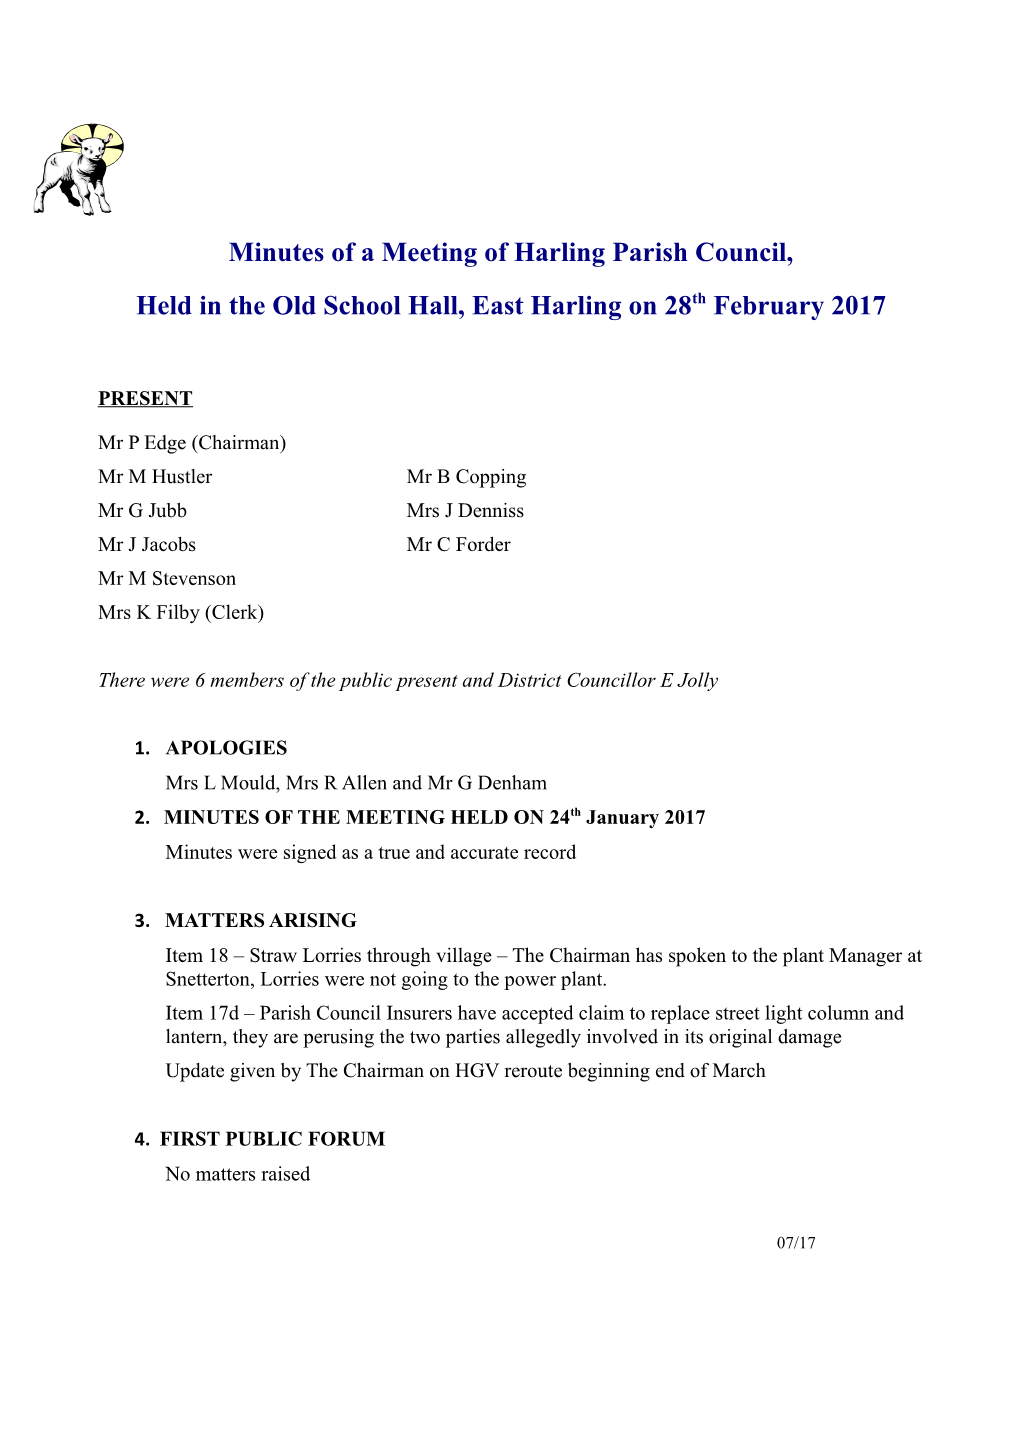 Minutes of a Meeting of Harling Parish Council